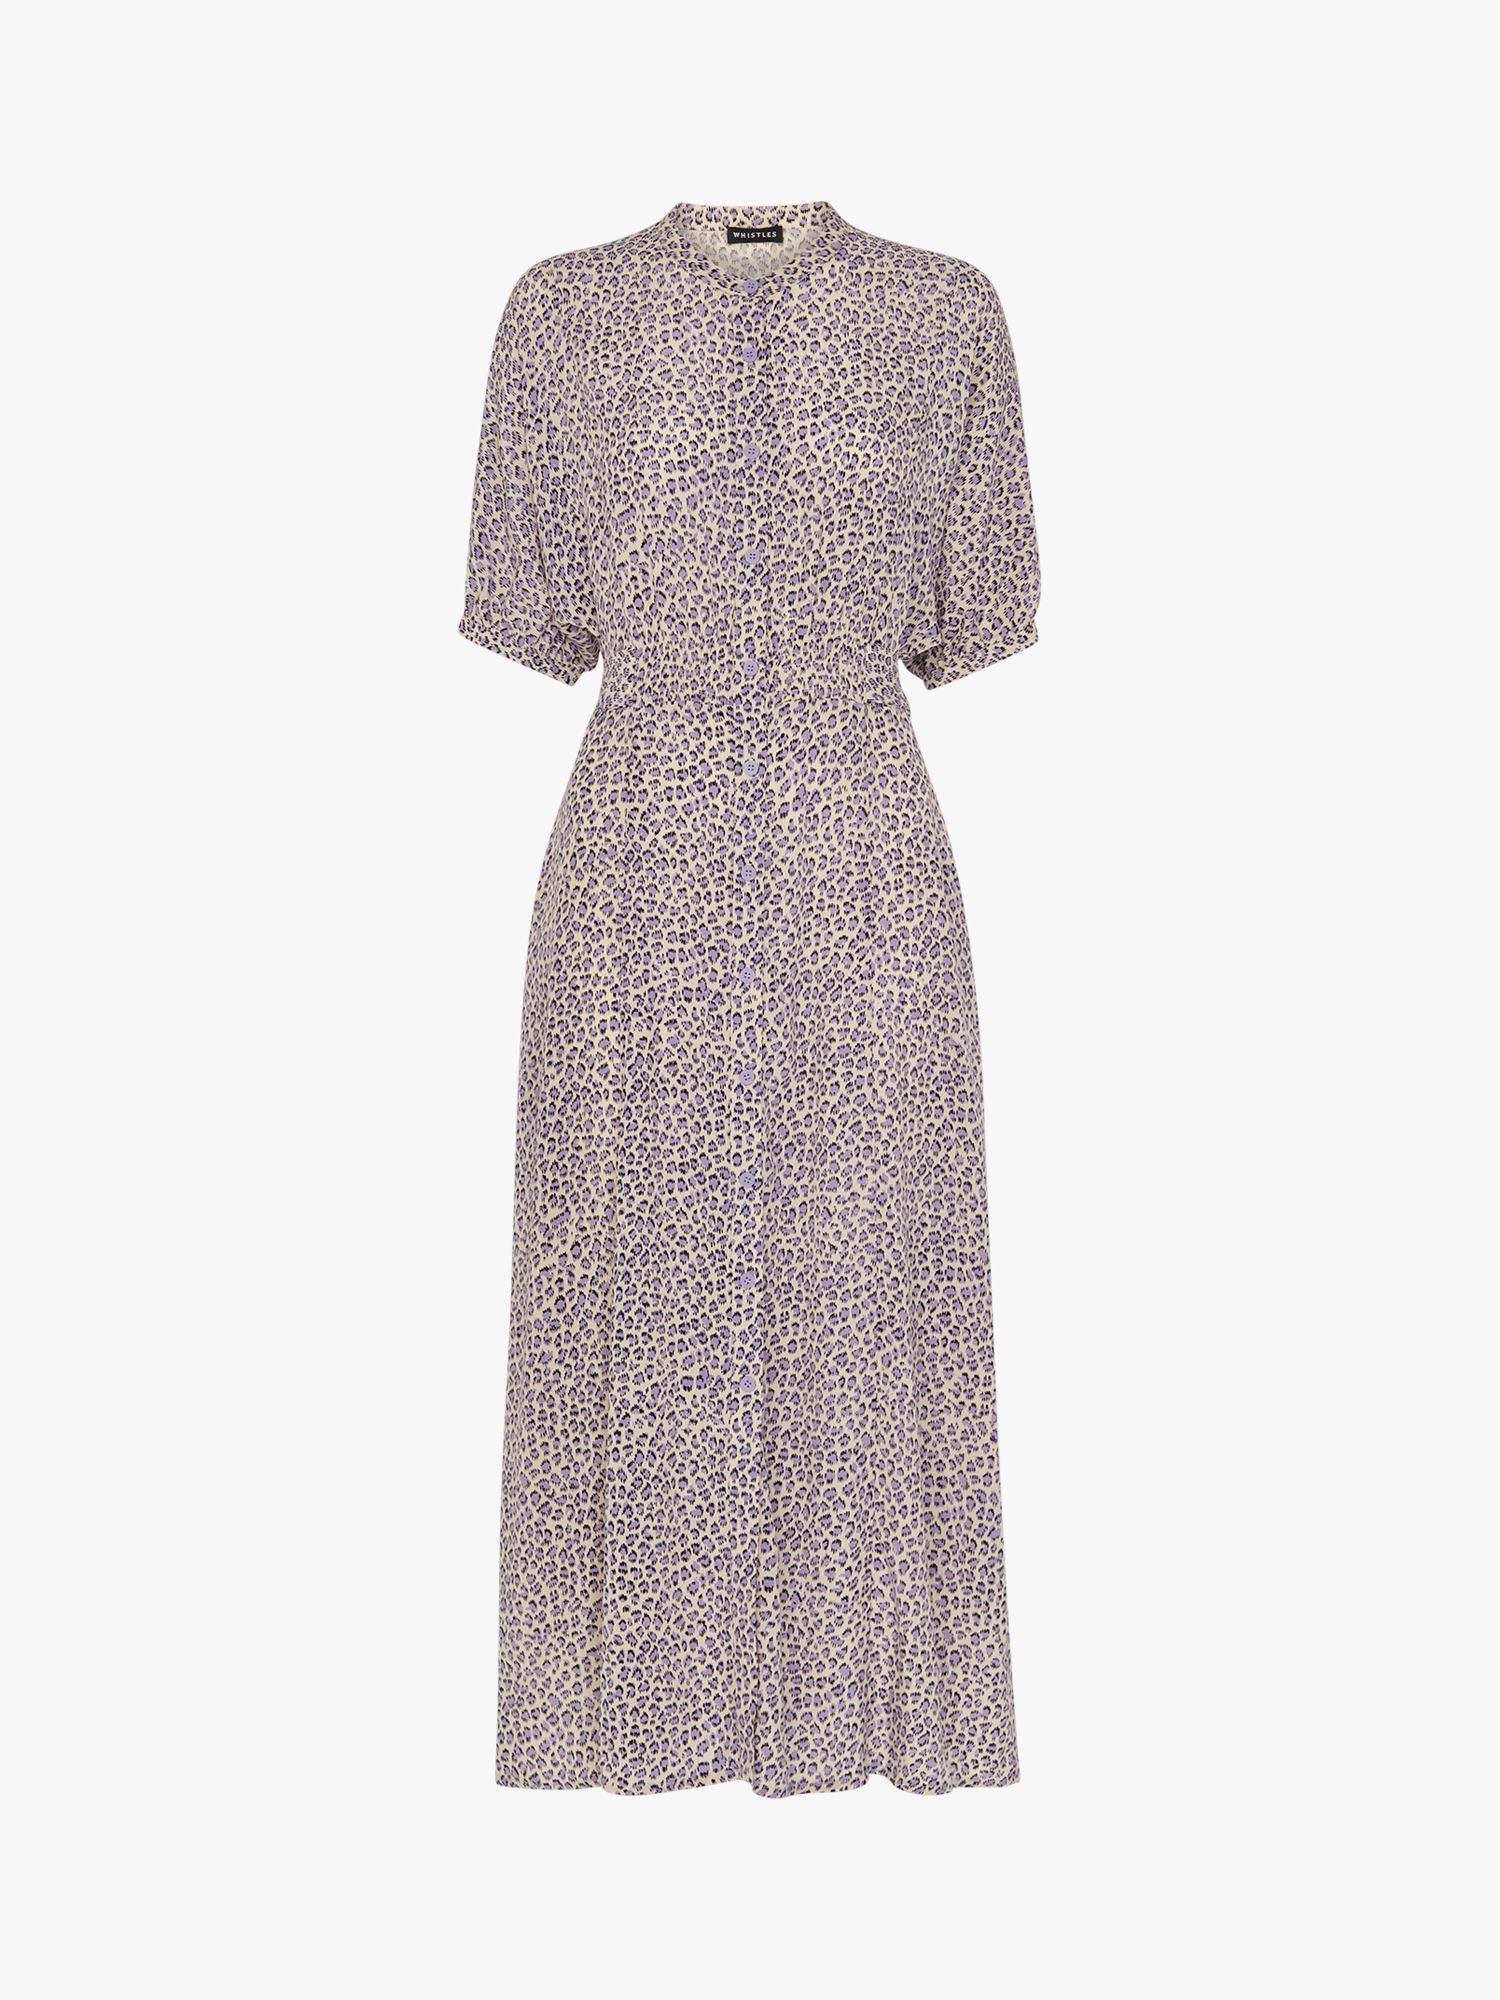 Buy Whistles Dashed Leopard Print Midi Dress, Lilac/Multi Online at johnlewis.com